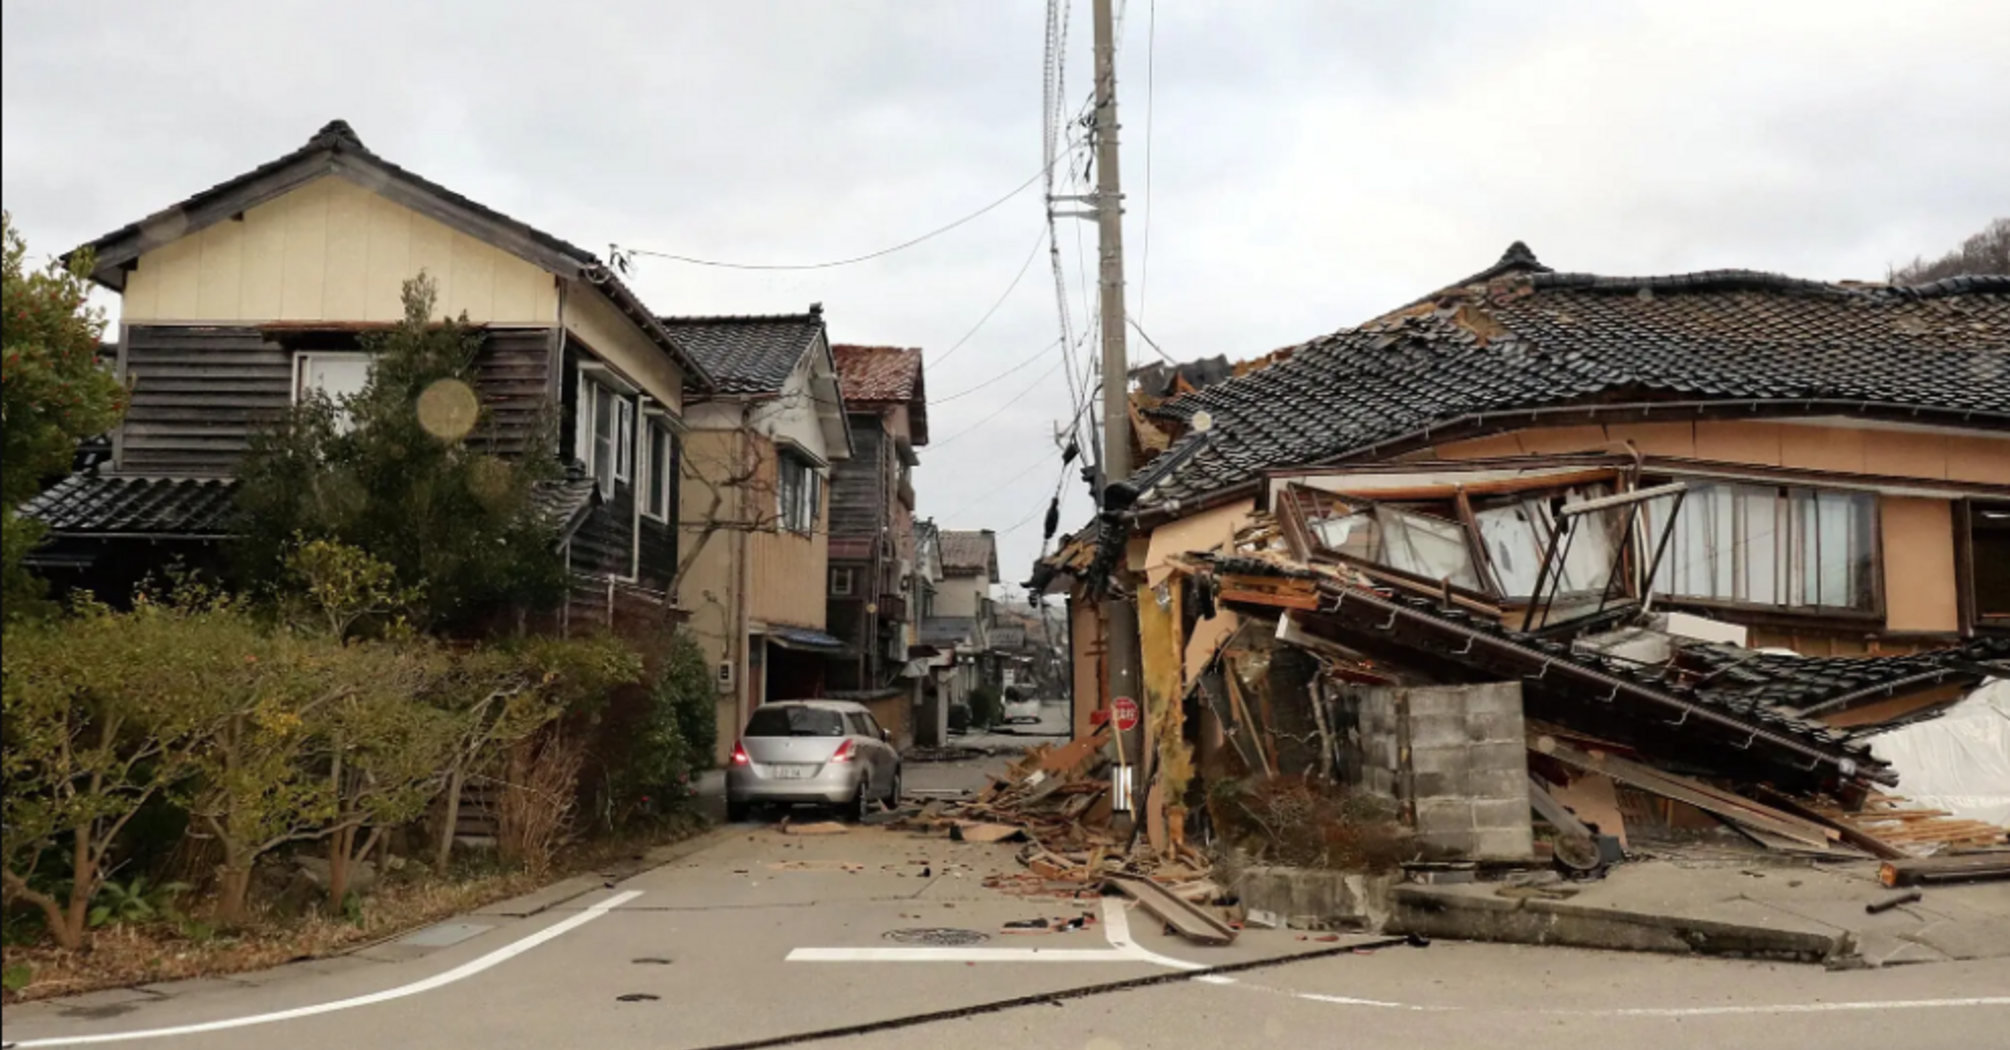 The aftermath of the earthquake in Japan